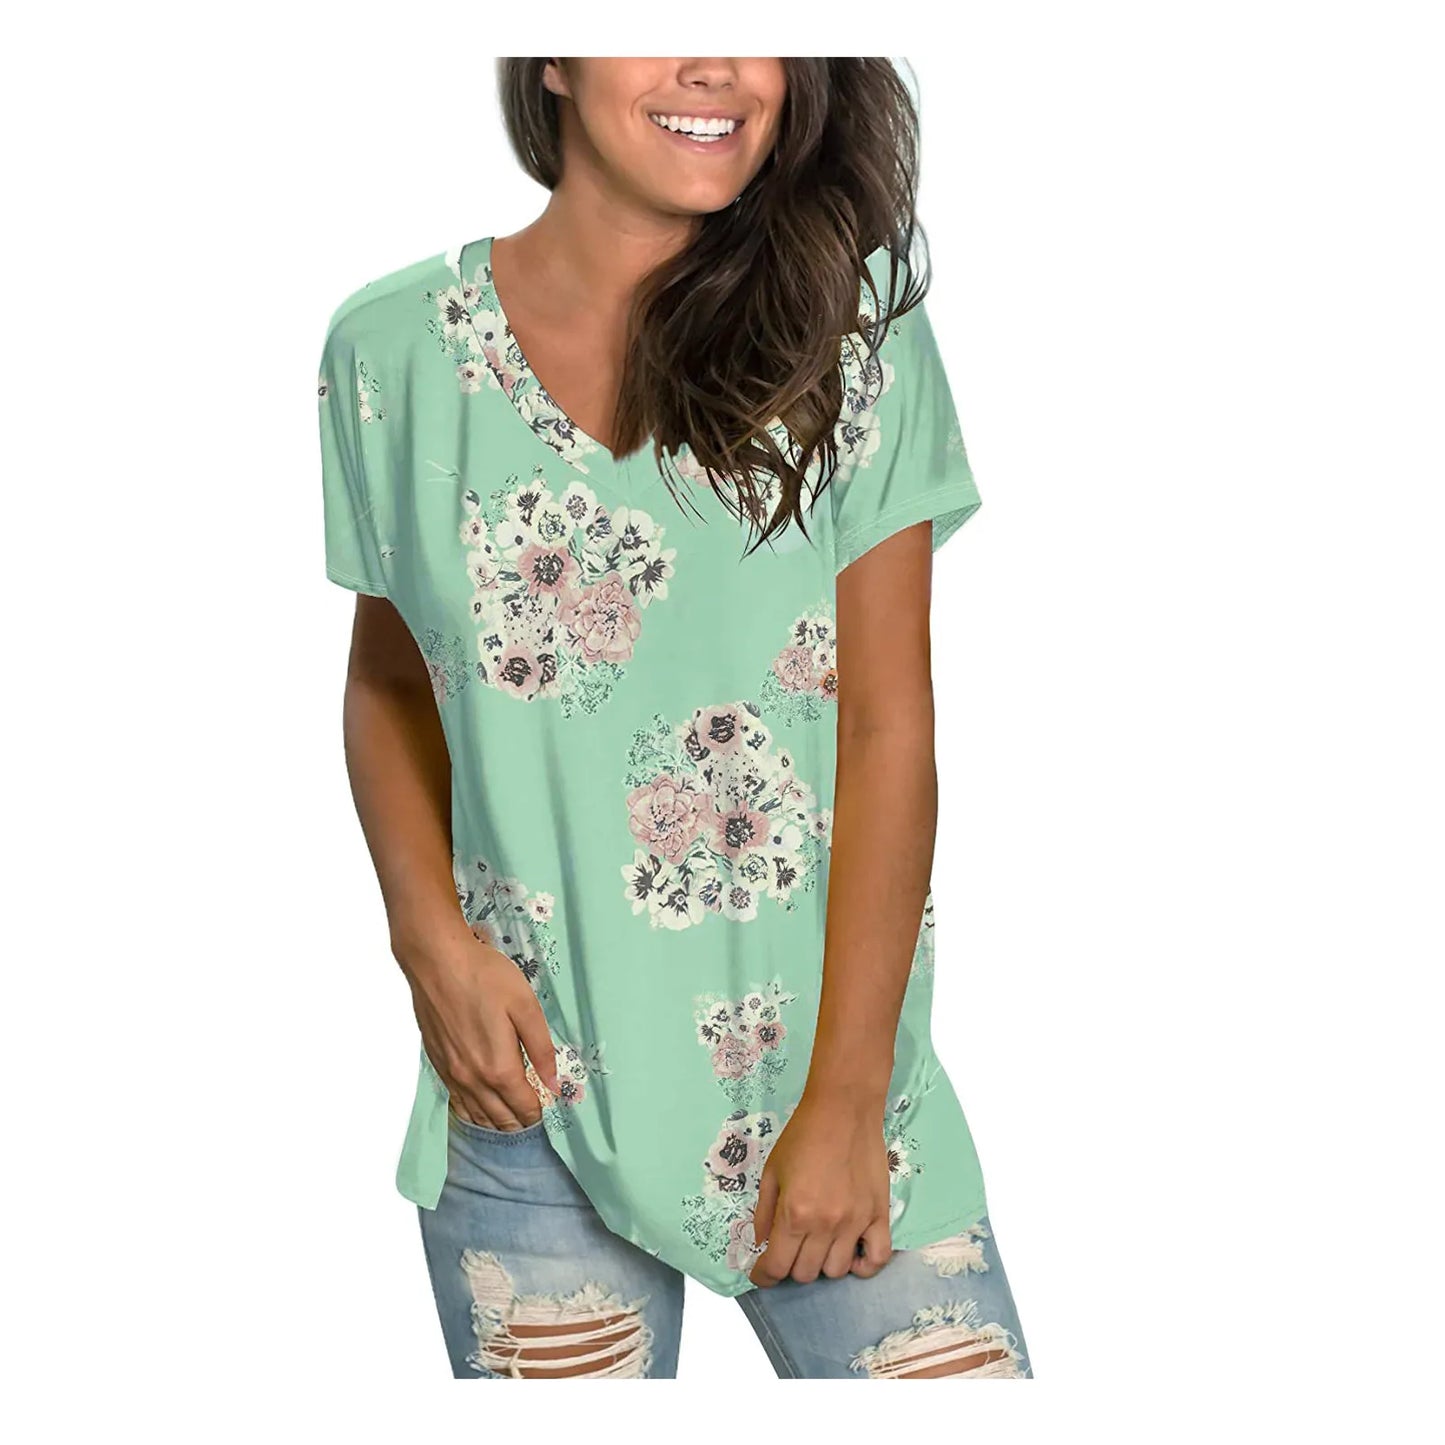 Women's Tops V-neck Printed T-shirt Casual